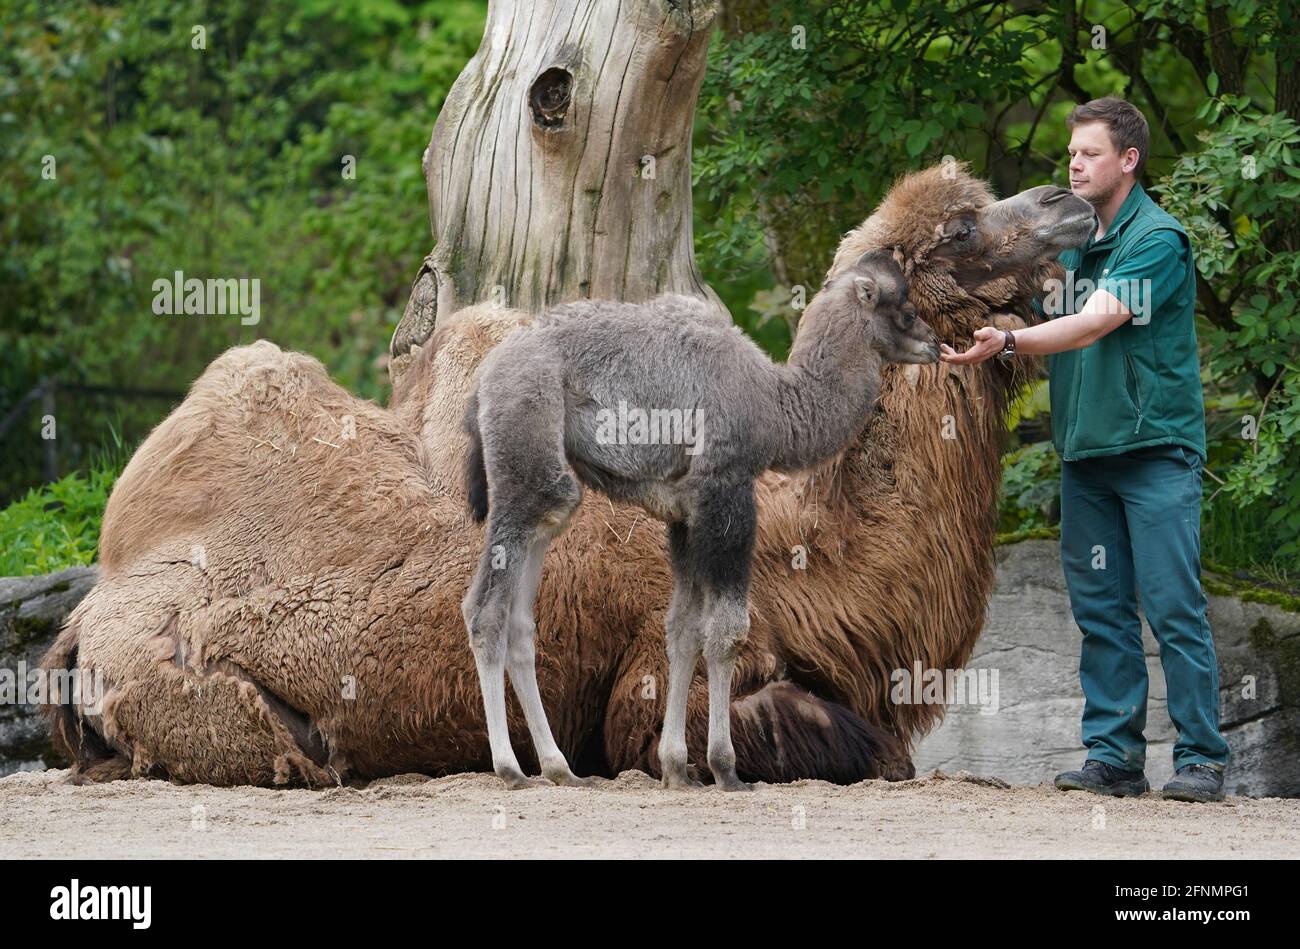 Hamburg, Germany. 18th May, 2021. District animal keeper Benjamin Krüger stands next to baby camel Silke and her mother Samira at Hagenbeck Zoo. The offspring of the Asian camel Samira was born on 2 May. Credit: Marcus Brandt/dpa/Alamy Live News Stock Photo